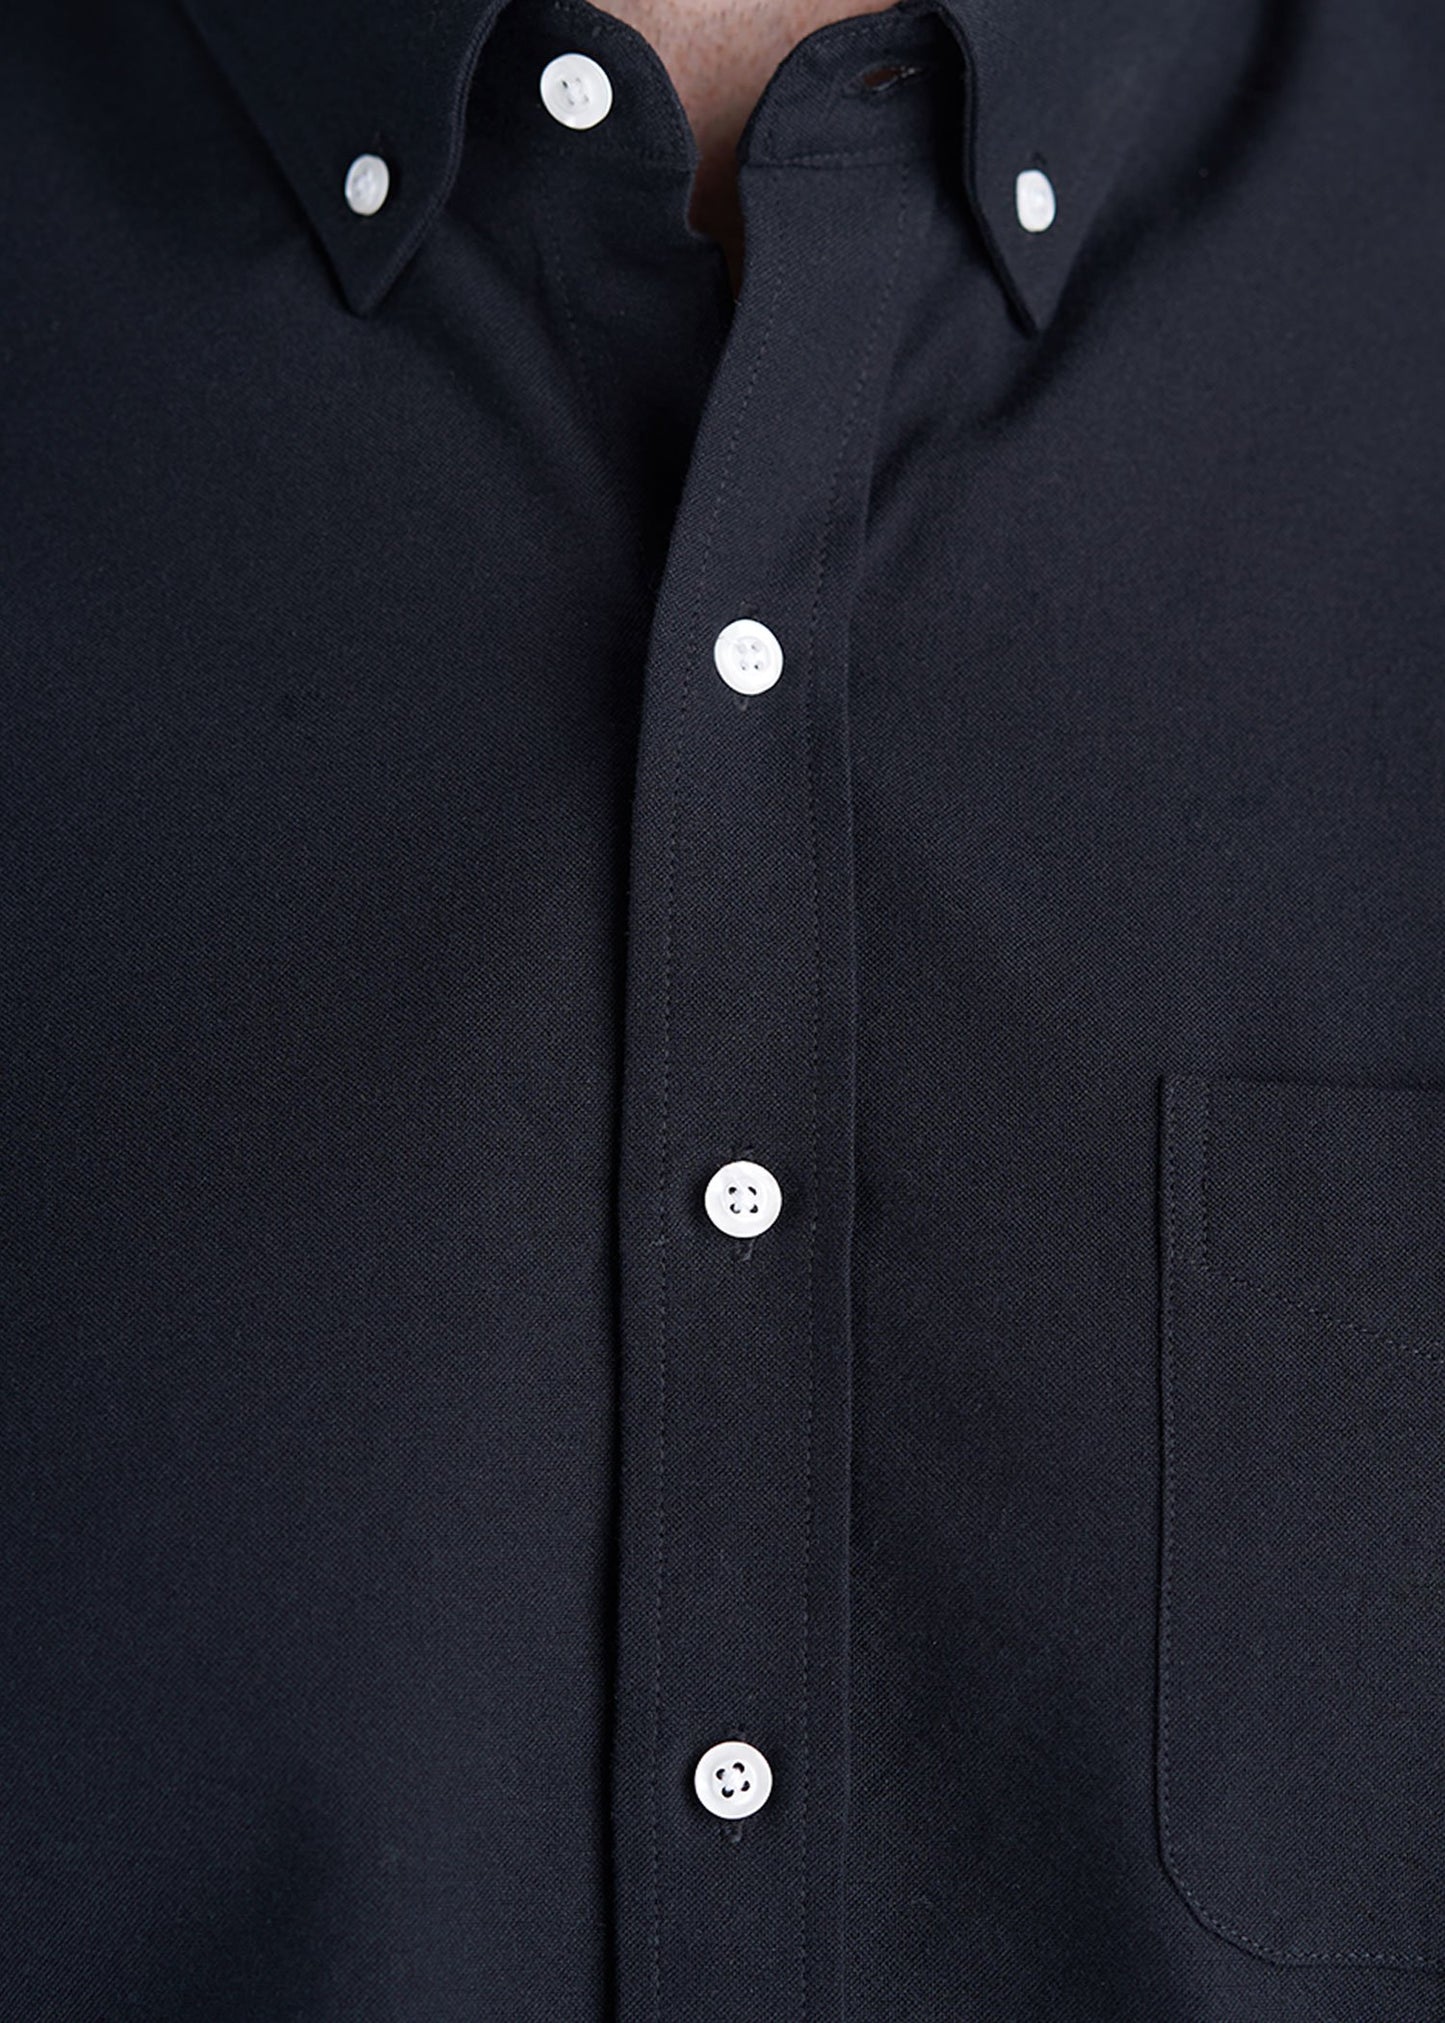 american-tall-mens-oxford-black-buttons